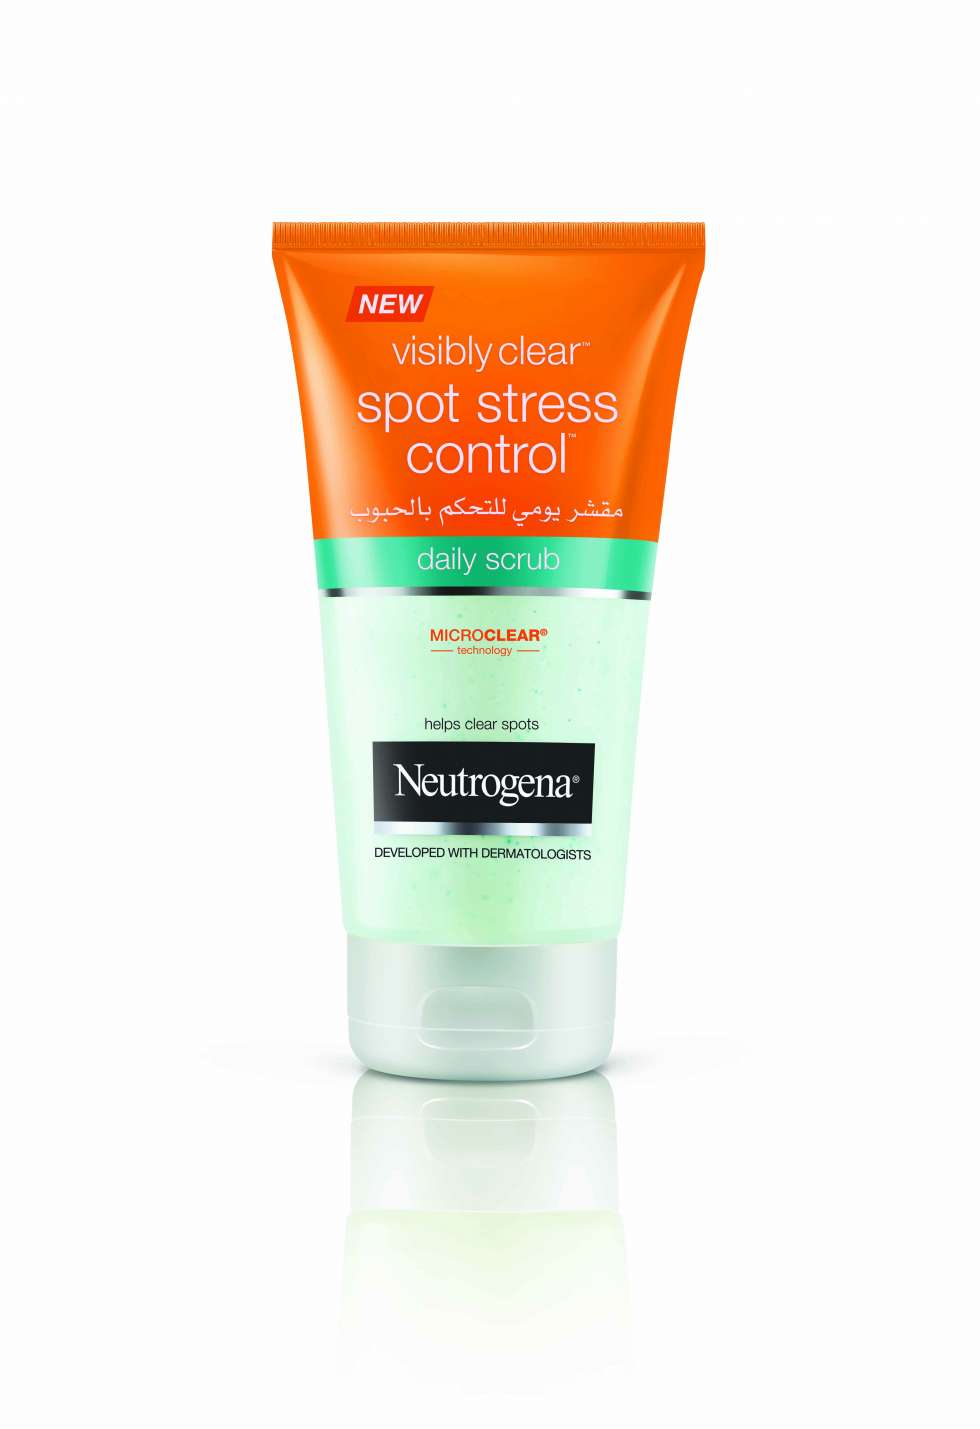 Stressed Out About Spots On Your Big Day? Here’s a Little Help from Neutrogena